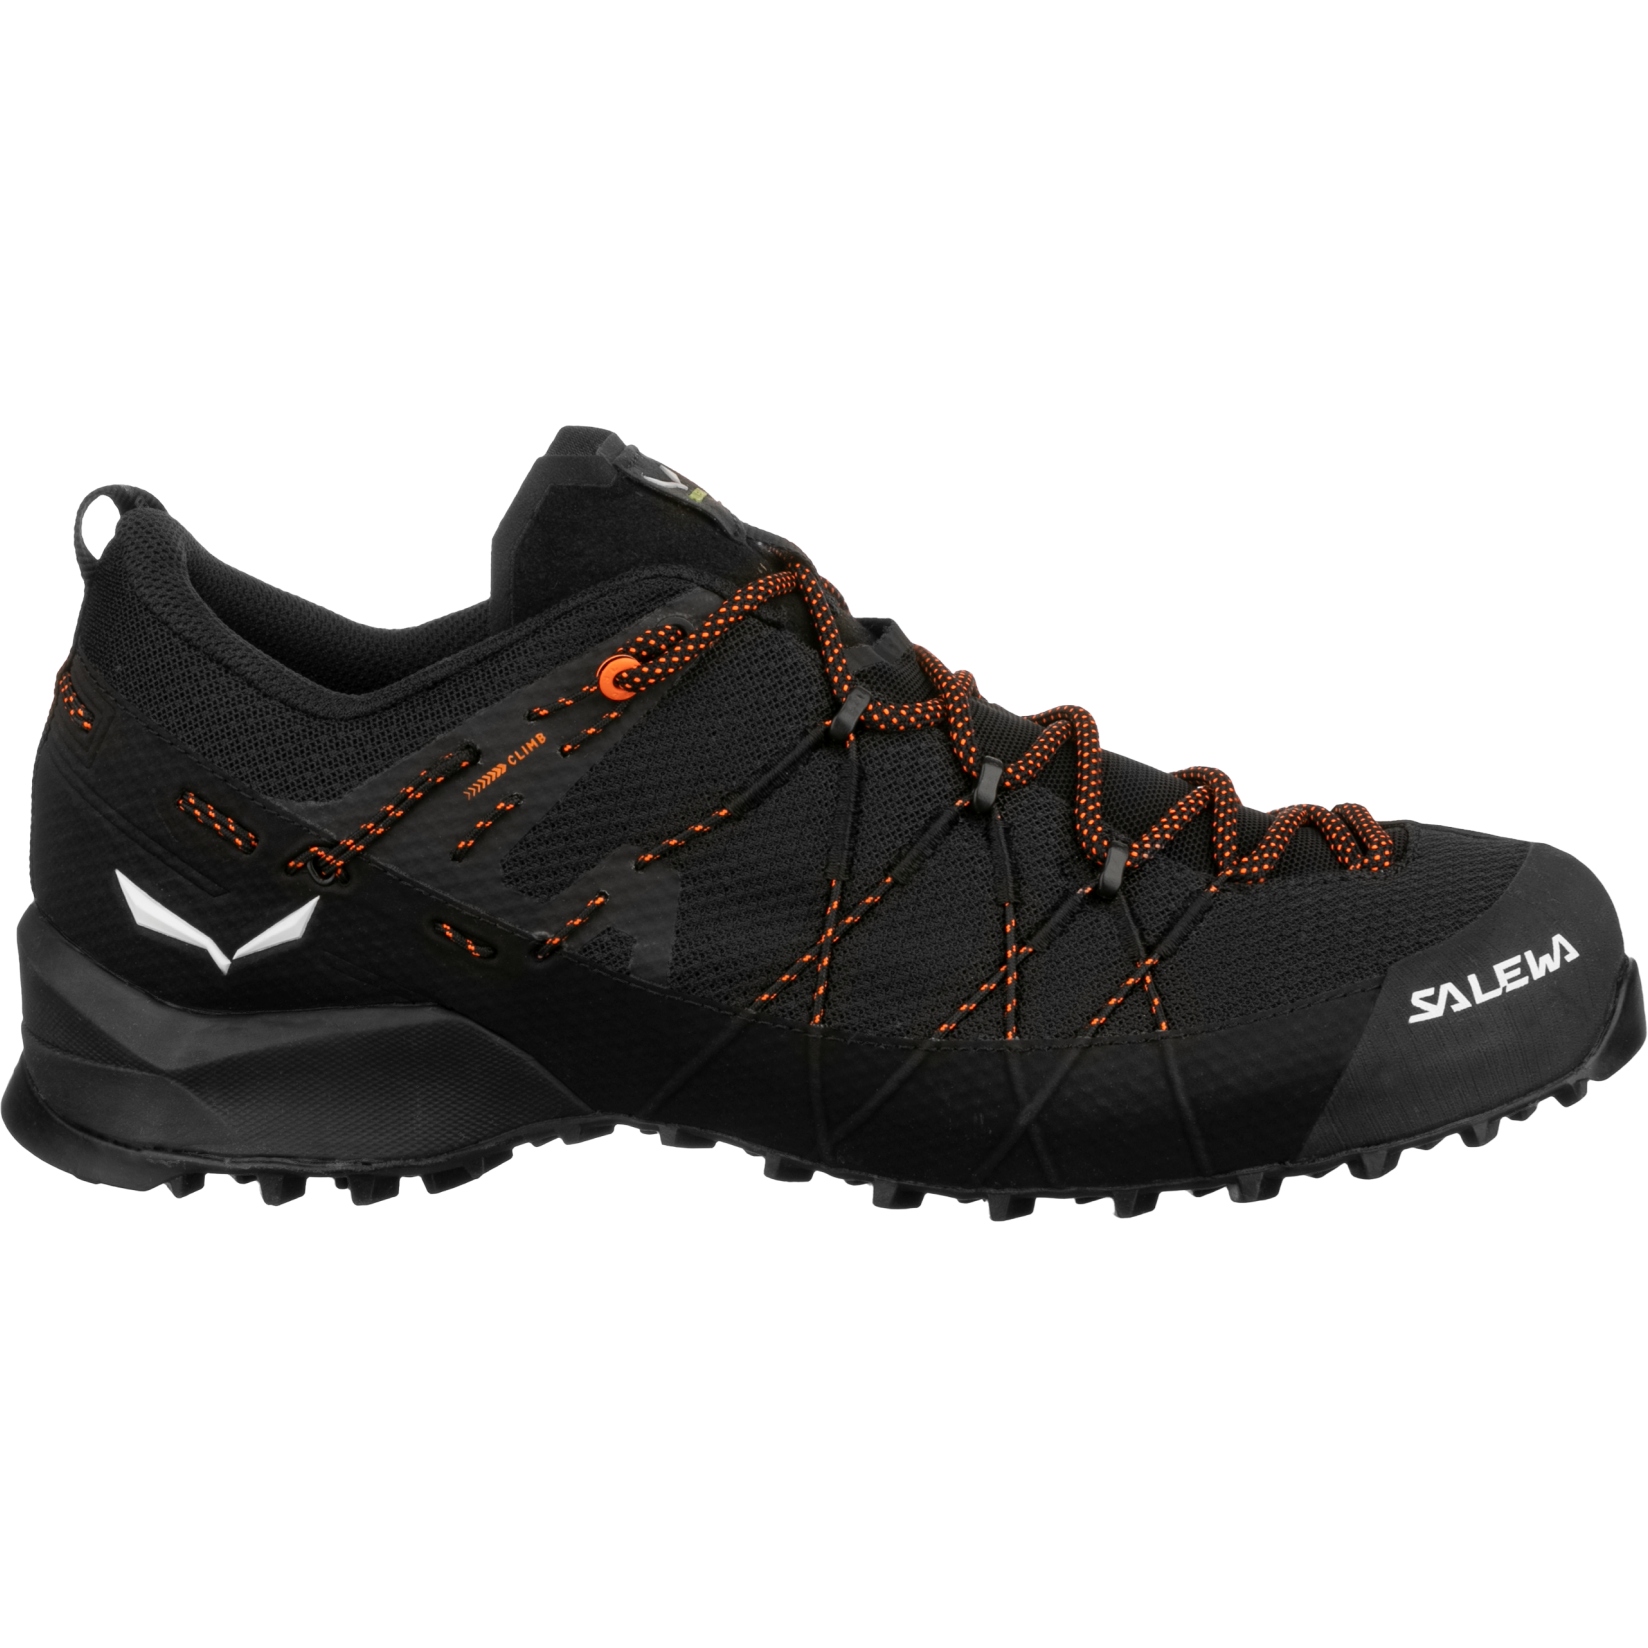 Image of Salewa Wildfire 2 Approach Shoes - black/black 971